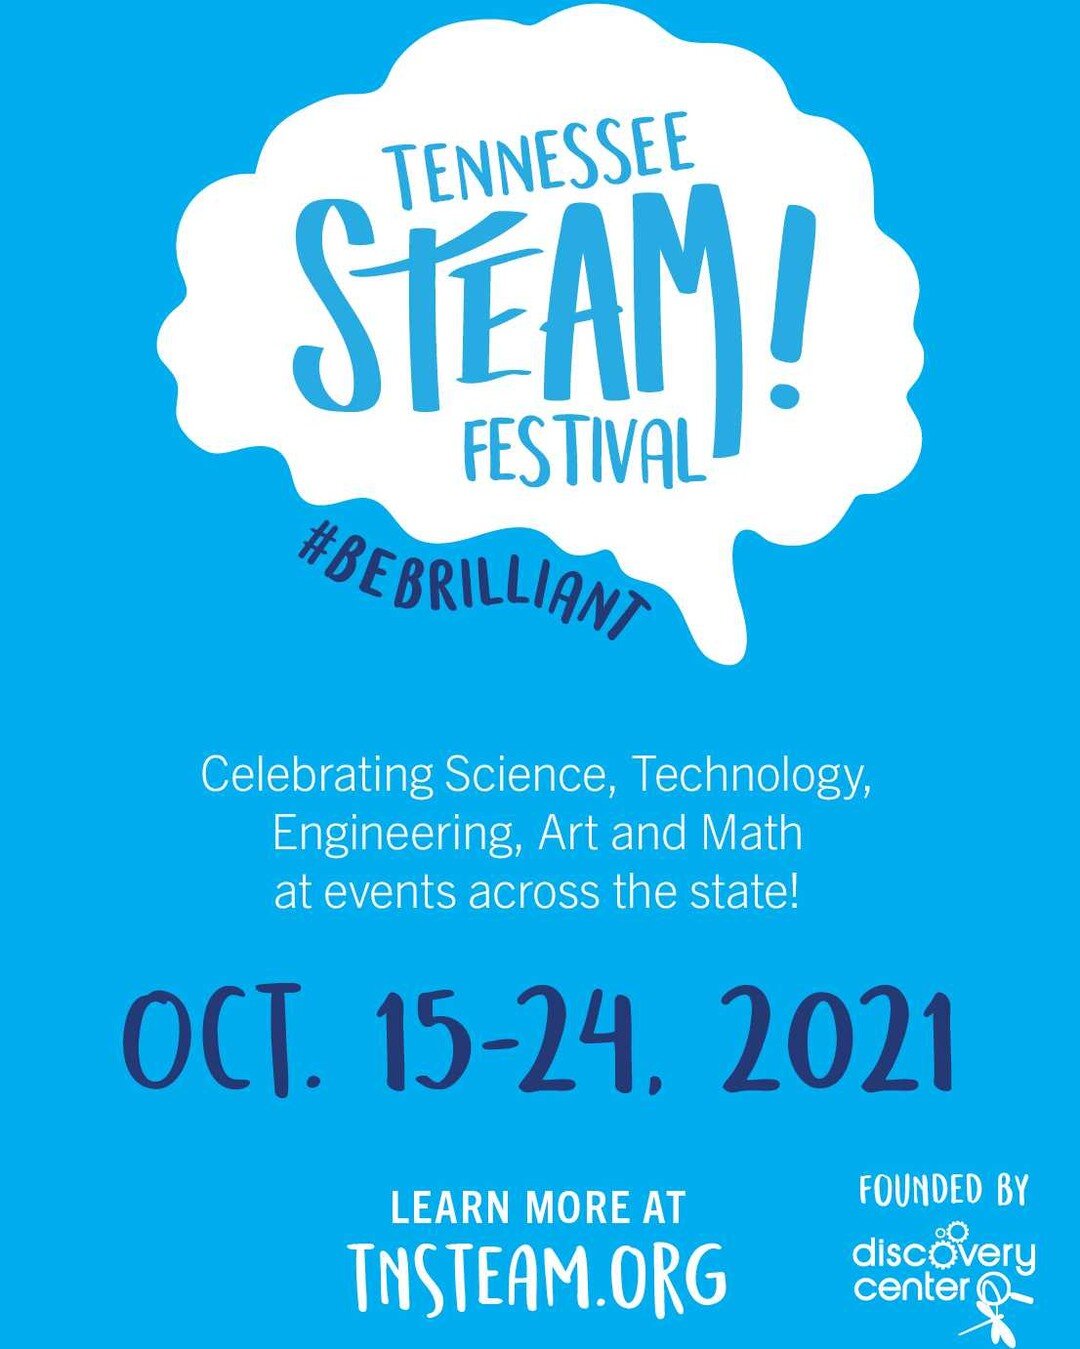 Save the dates for this year&rsquo;s Tennessee STEAM Festival: October 15-24, 2021!

Founded by the Discovery Center, the Tennessee STEAM Festival brings science, technology, engineering, art, and math to life at events across the state! It incorpora